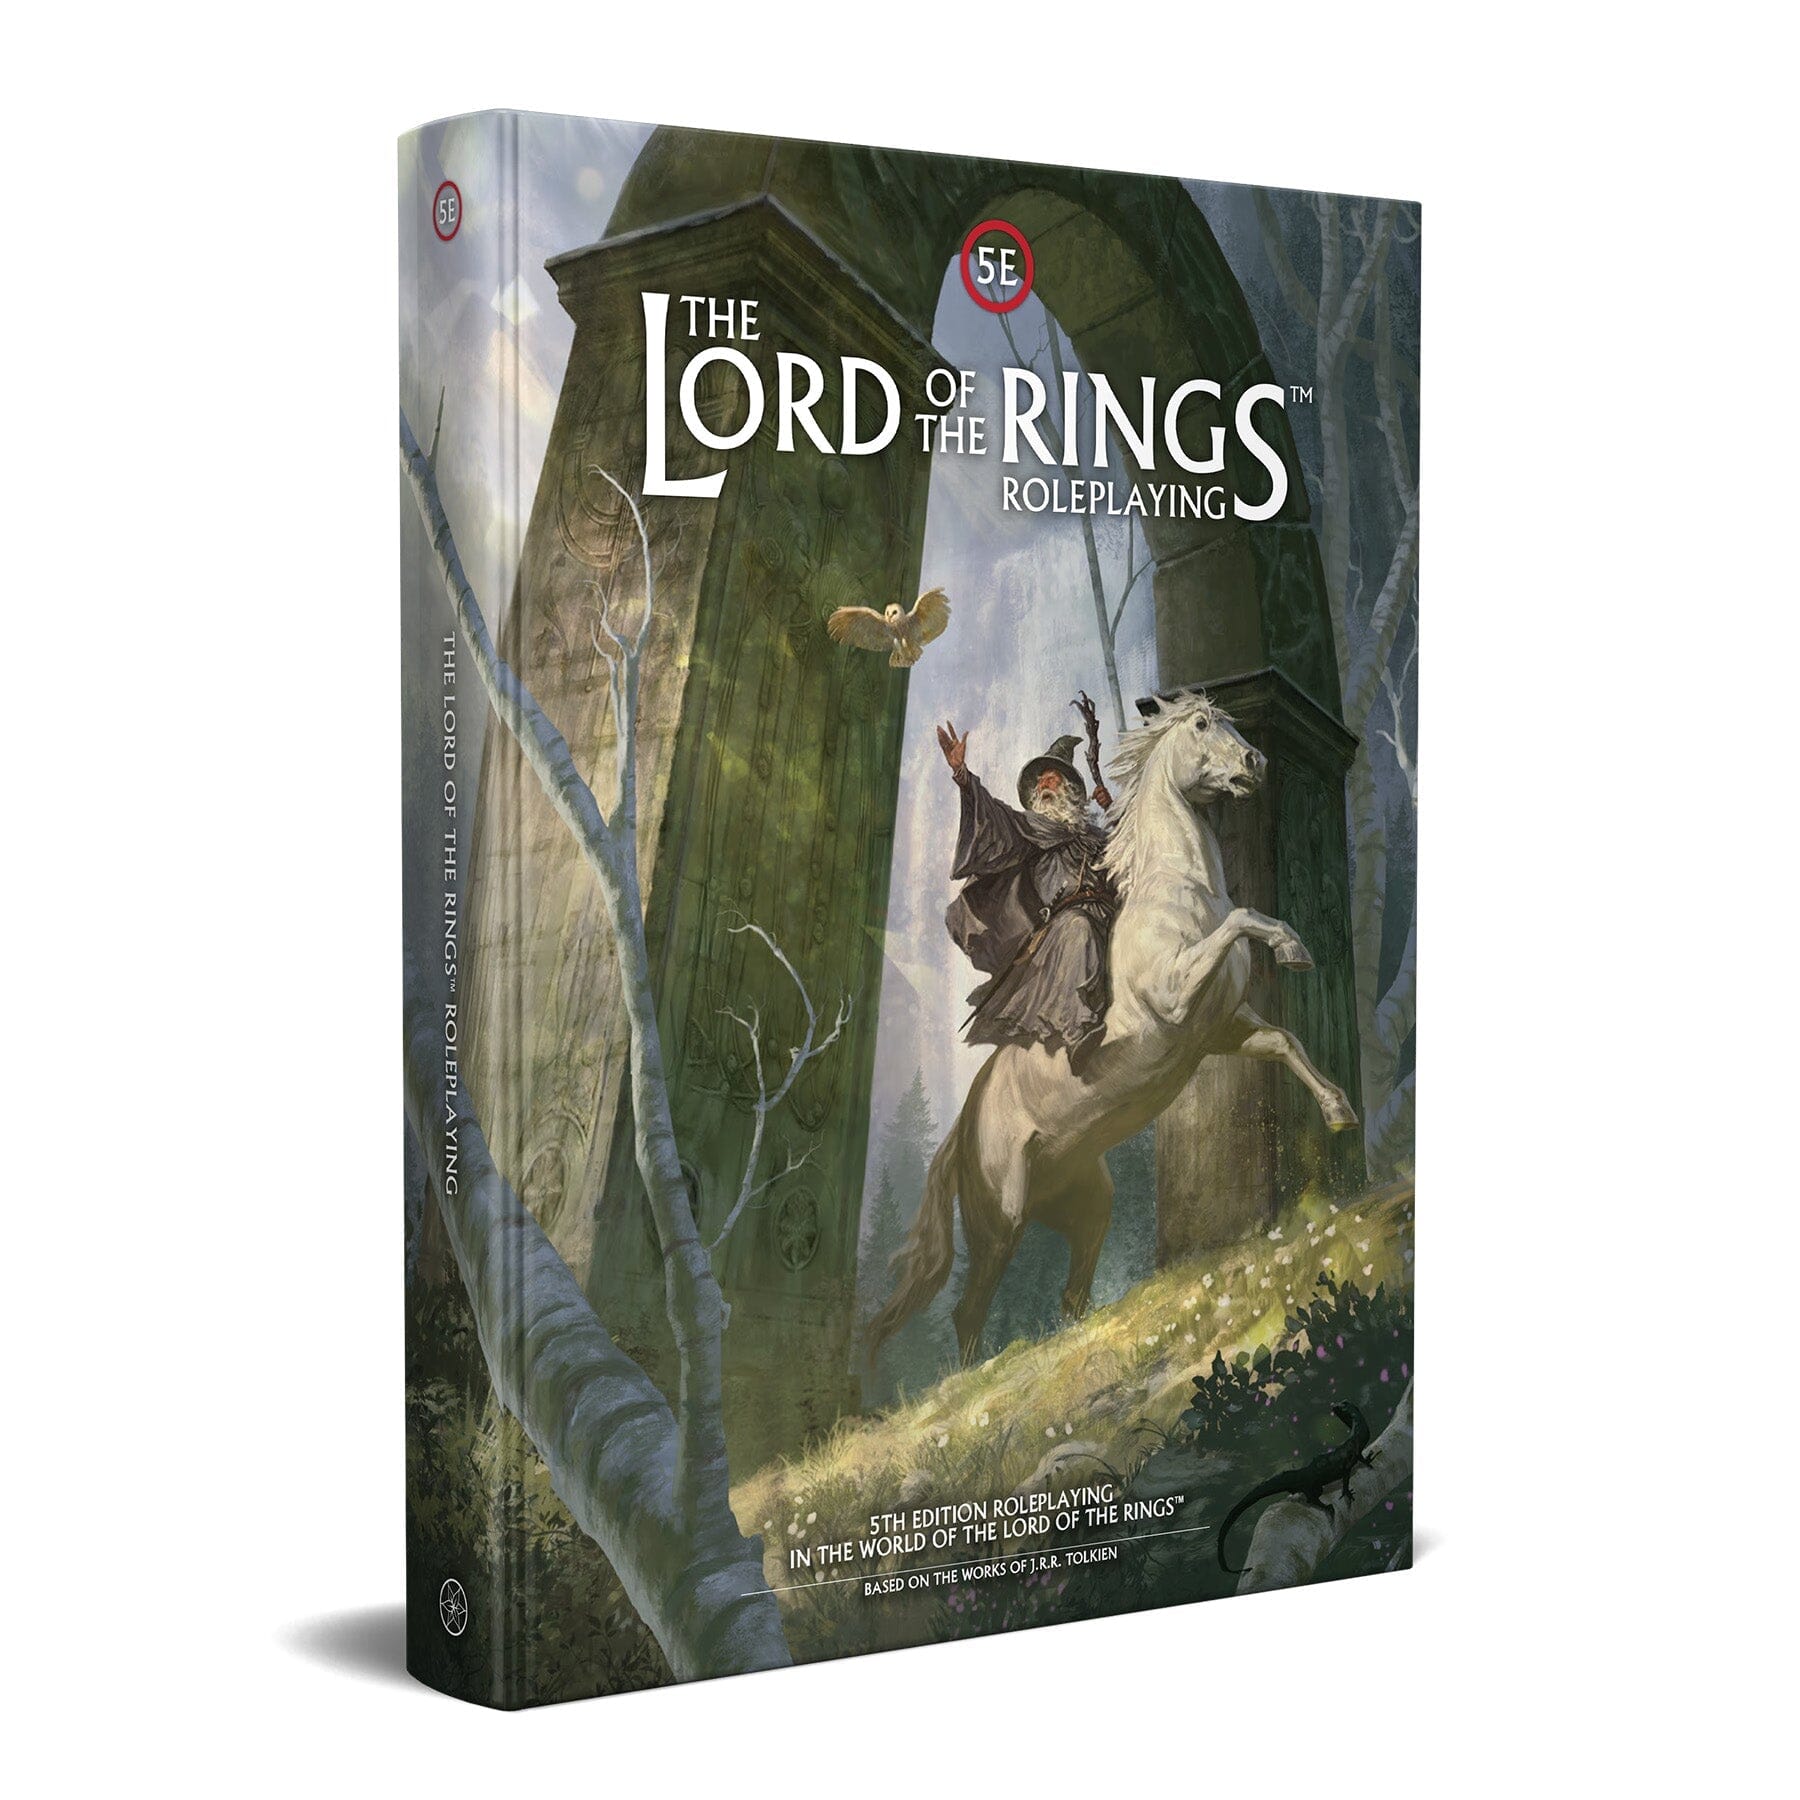 Hero's Journal (The Lord of the Rings Roleplaying Game)